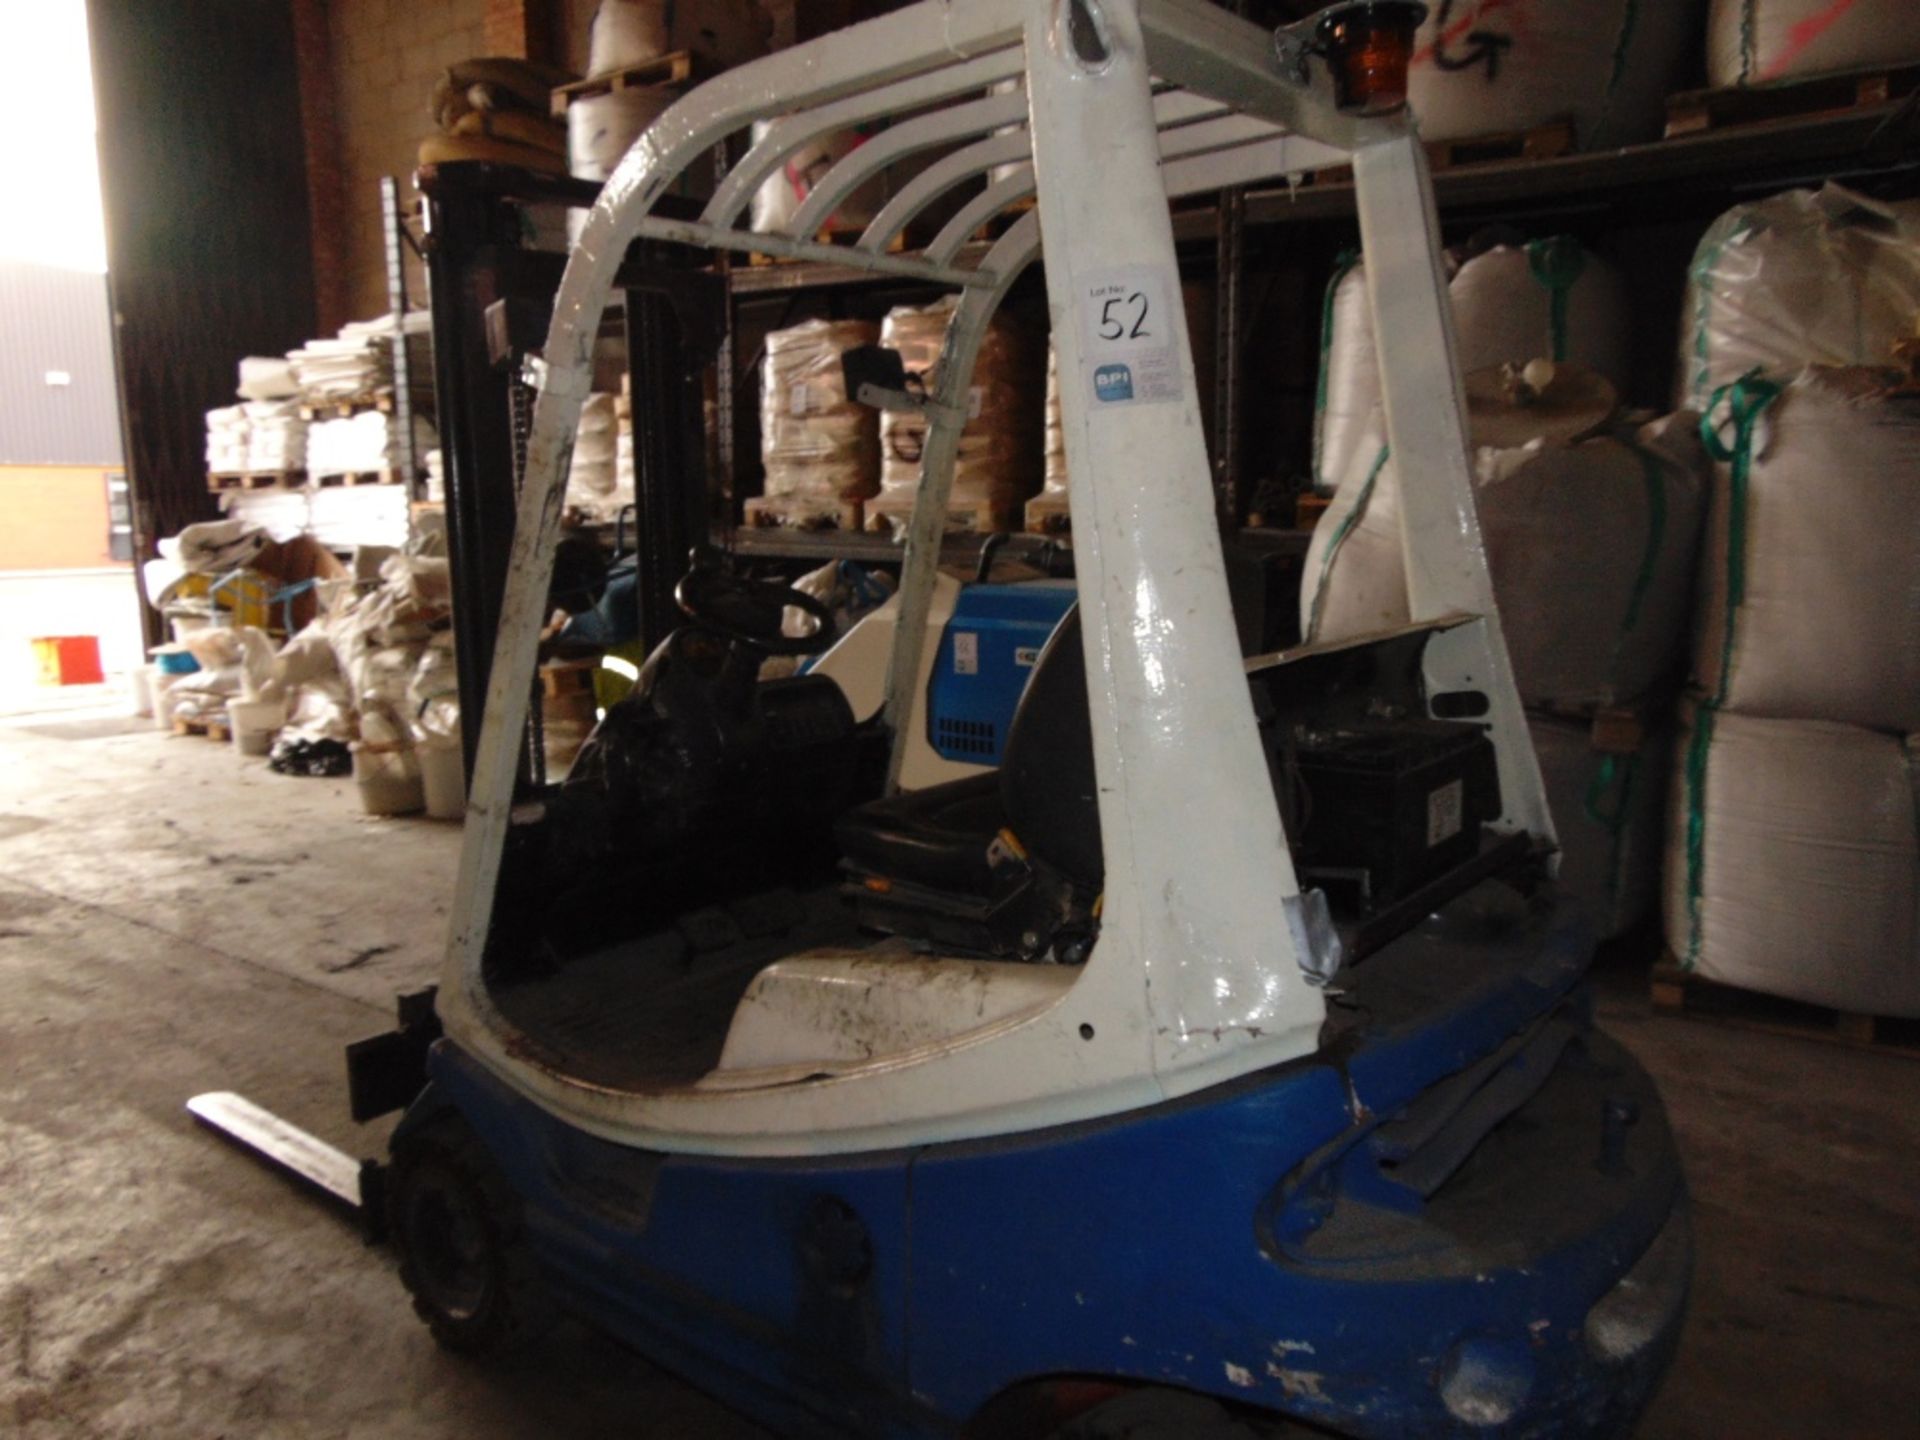 H16P Diesel Forklift Truck, Capacity: 1600Kg, Hours: 4617, Year of Manufacture: 1995 - Image 3 of 3